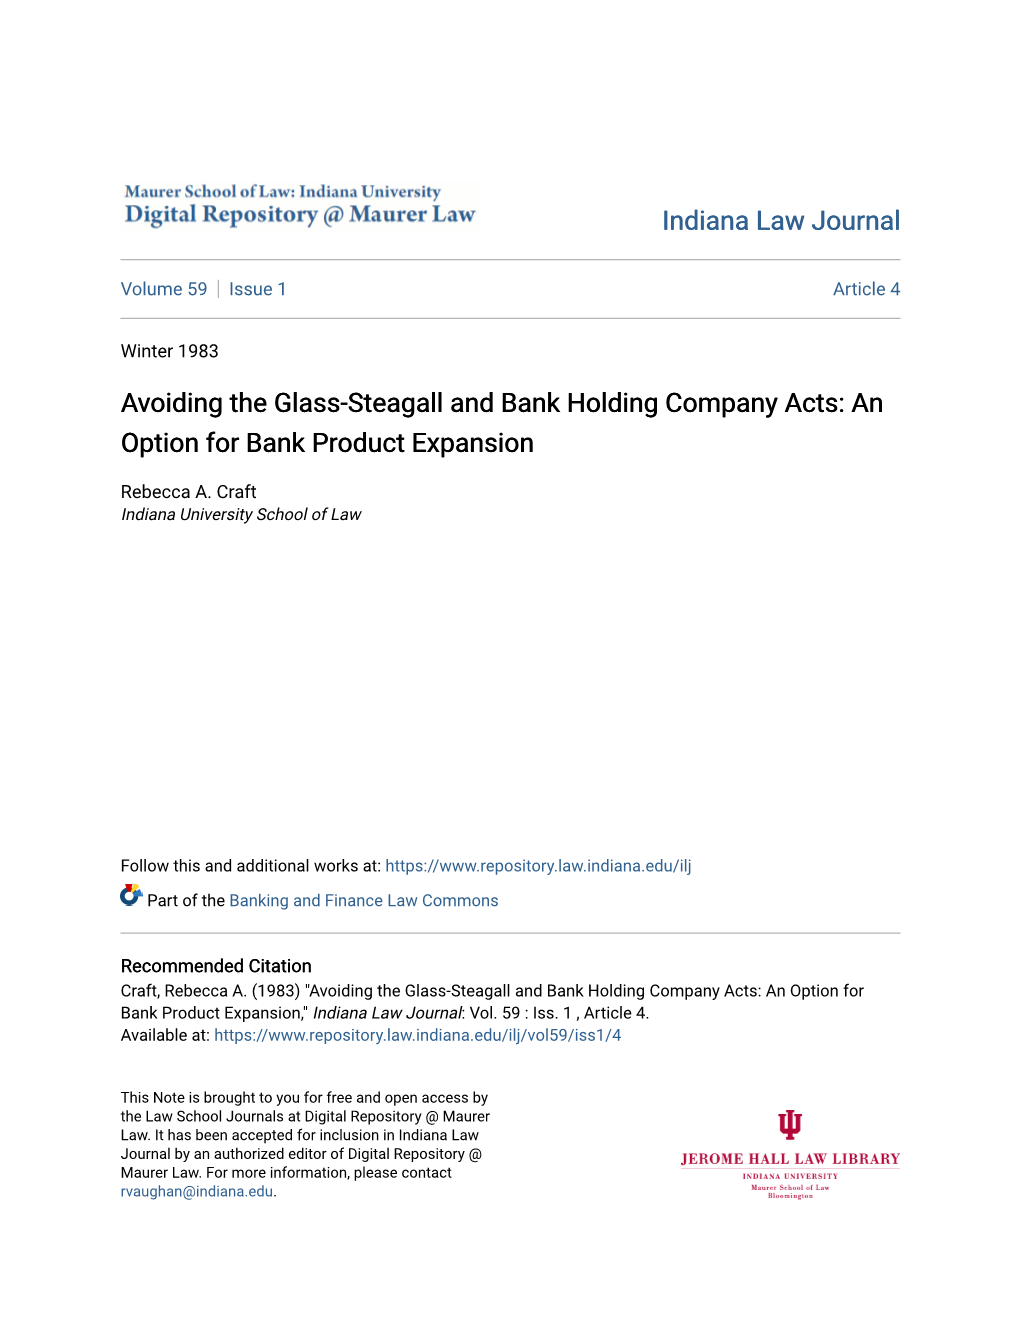 Avoiding the Glass-Steagall and Bank Holding Company Acts: an Option for Bank Product Expansion